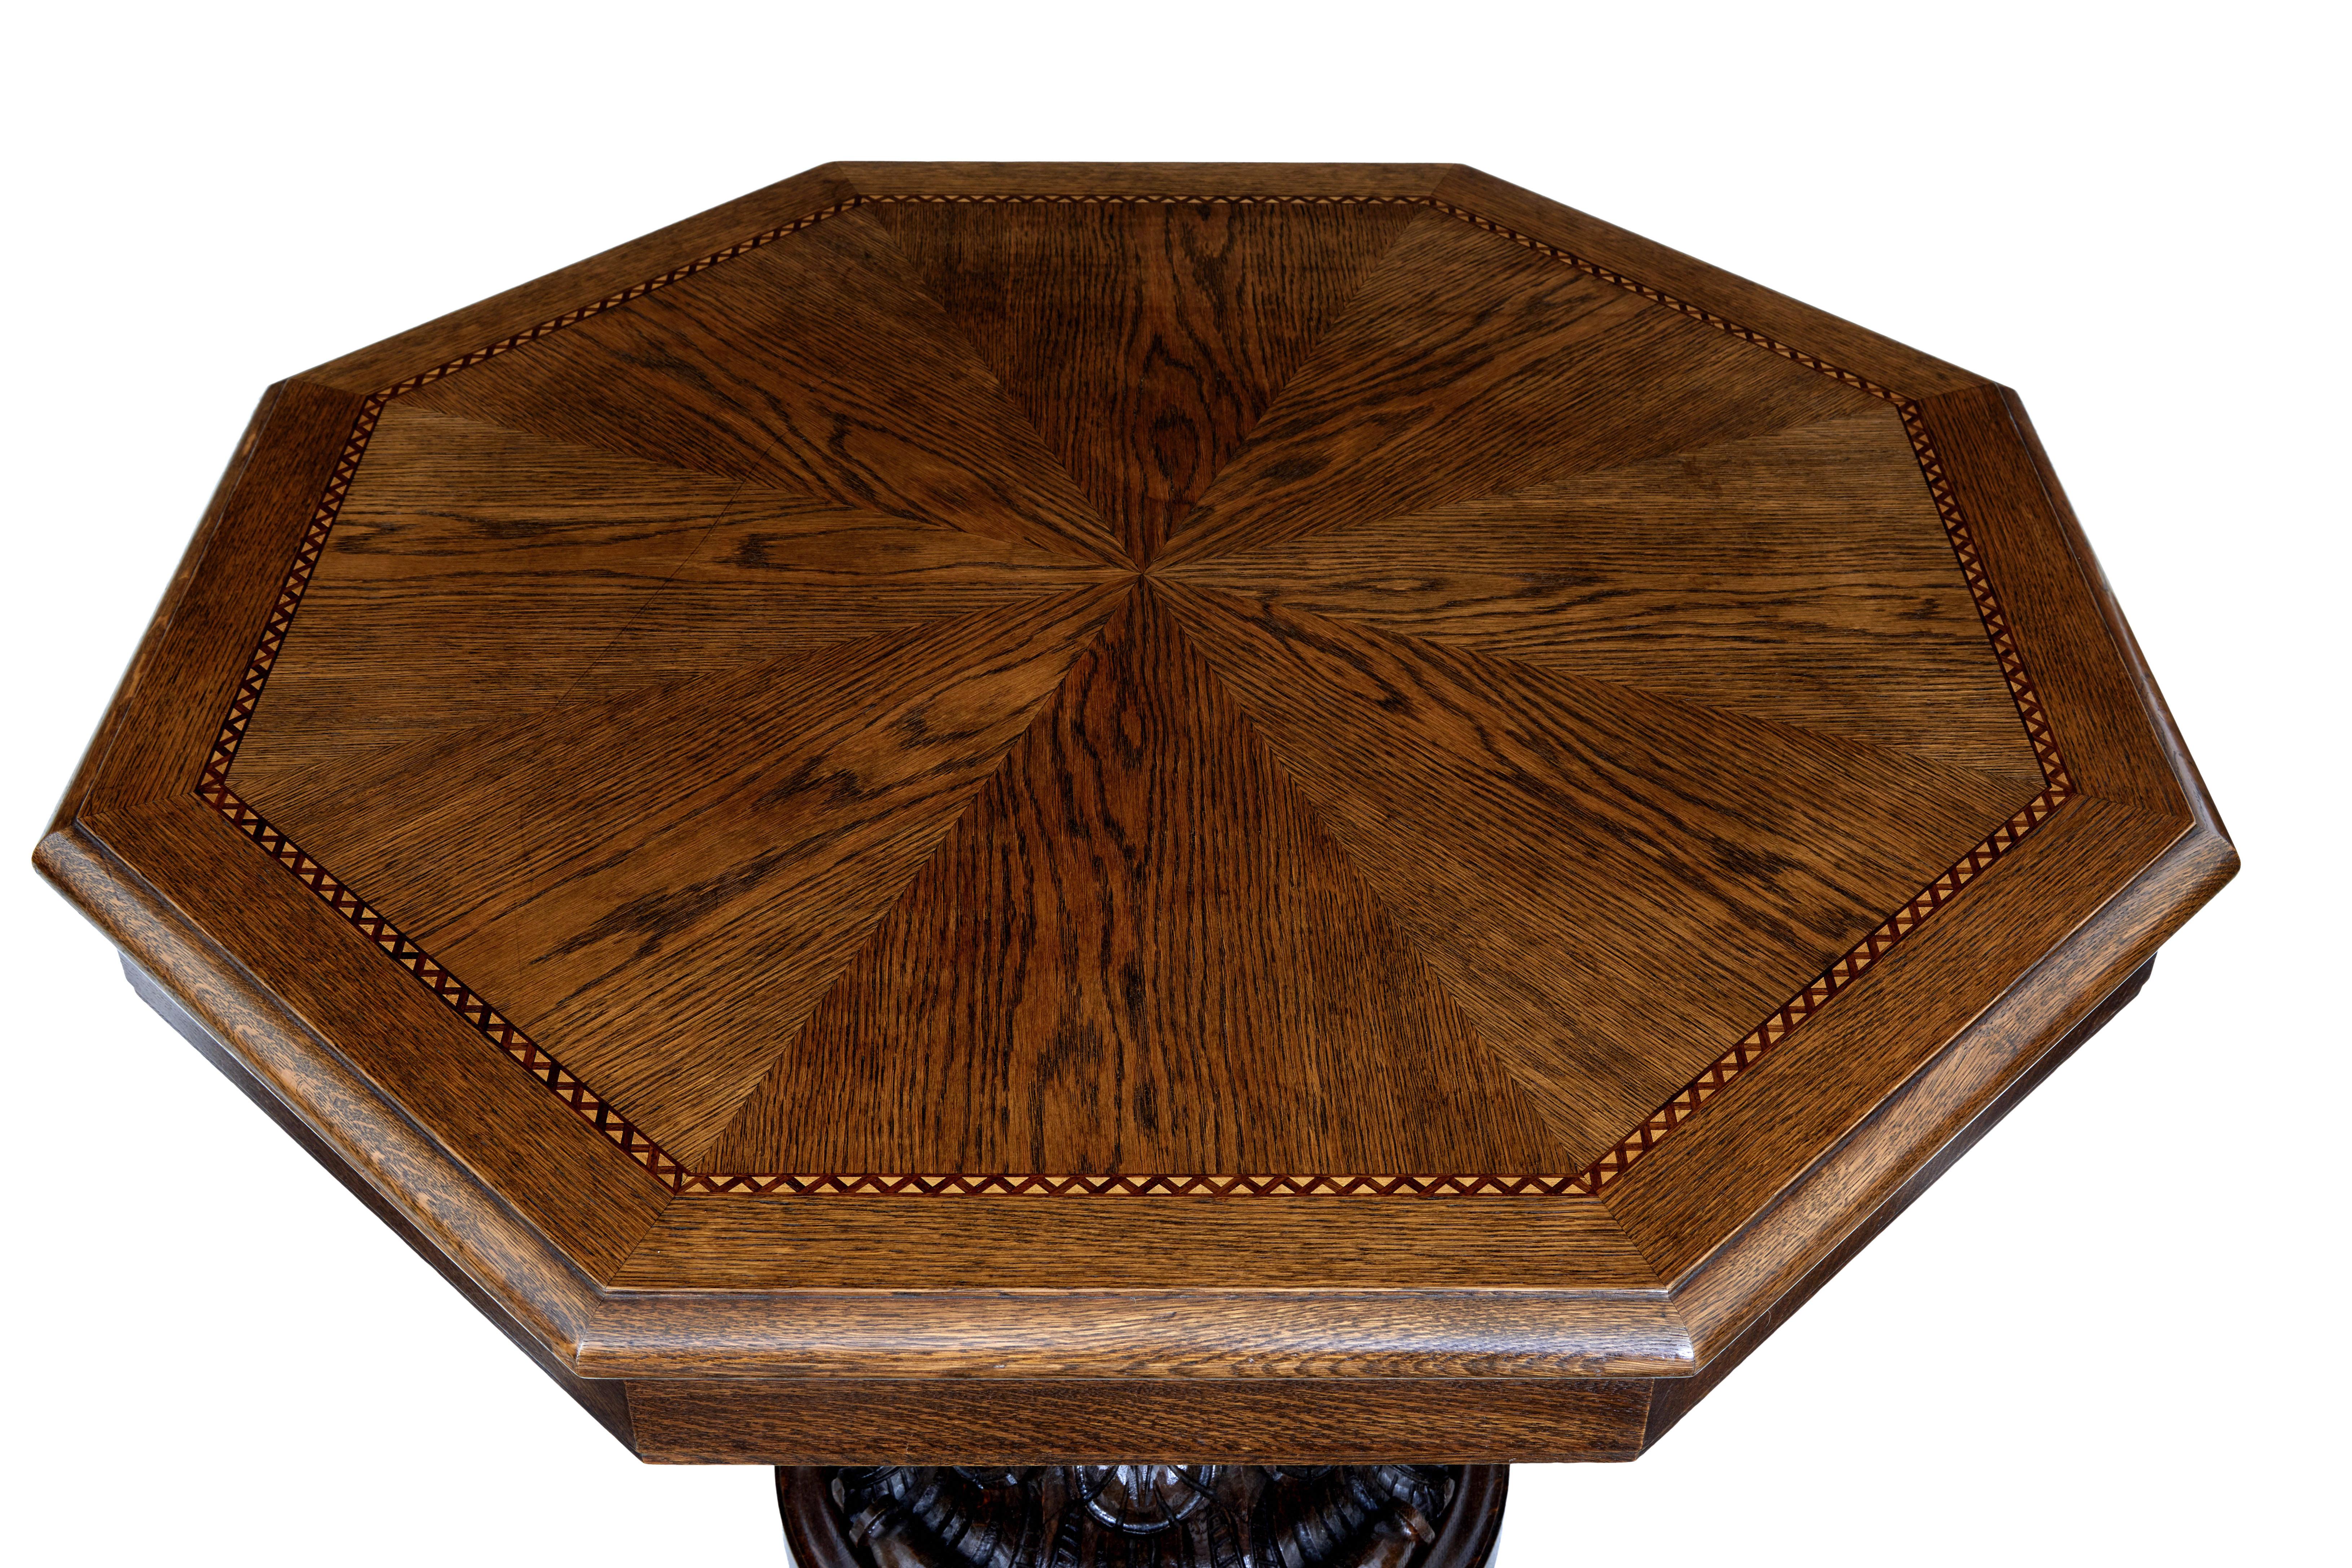 Gothic Revival 19th Century Carved Oak Hexagonal Top Centre Table